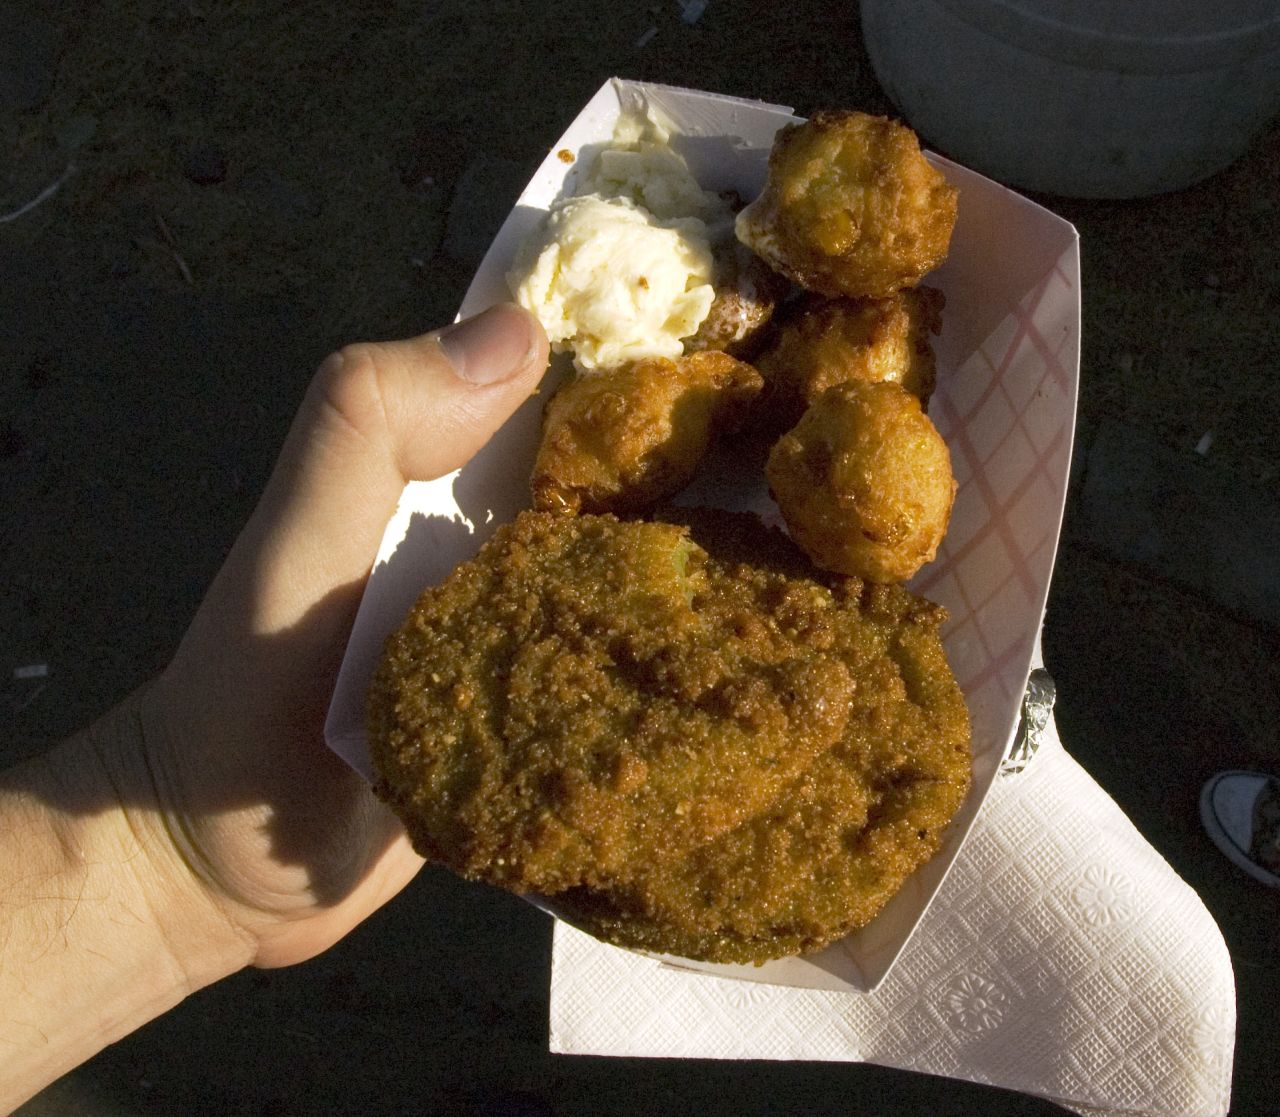 Fried green tomatoes and corn fritters were served hot and fresh with a scoop of honey butter.